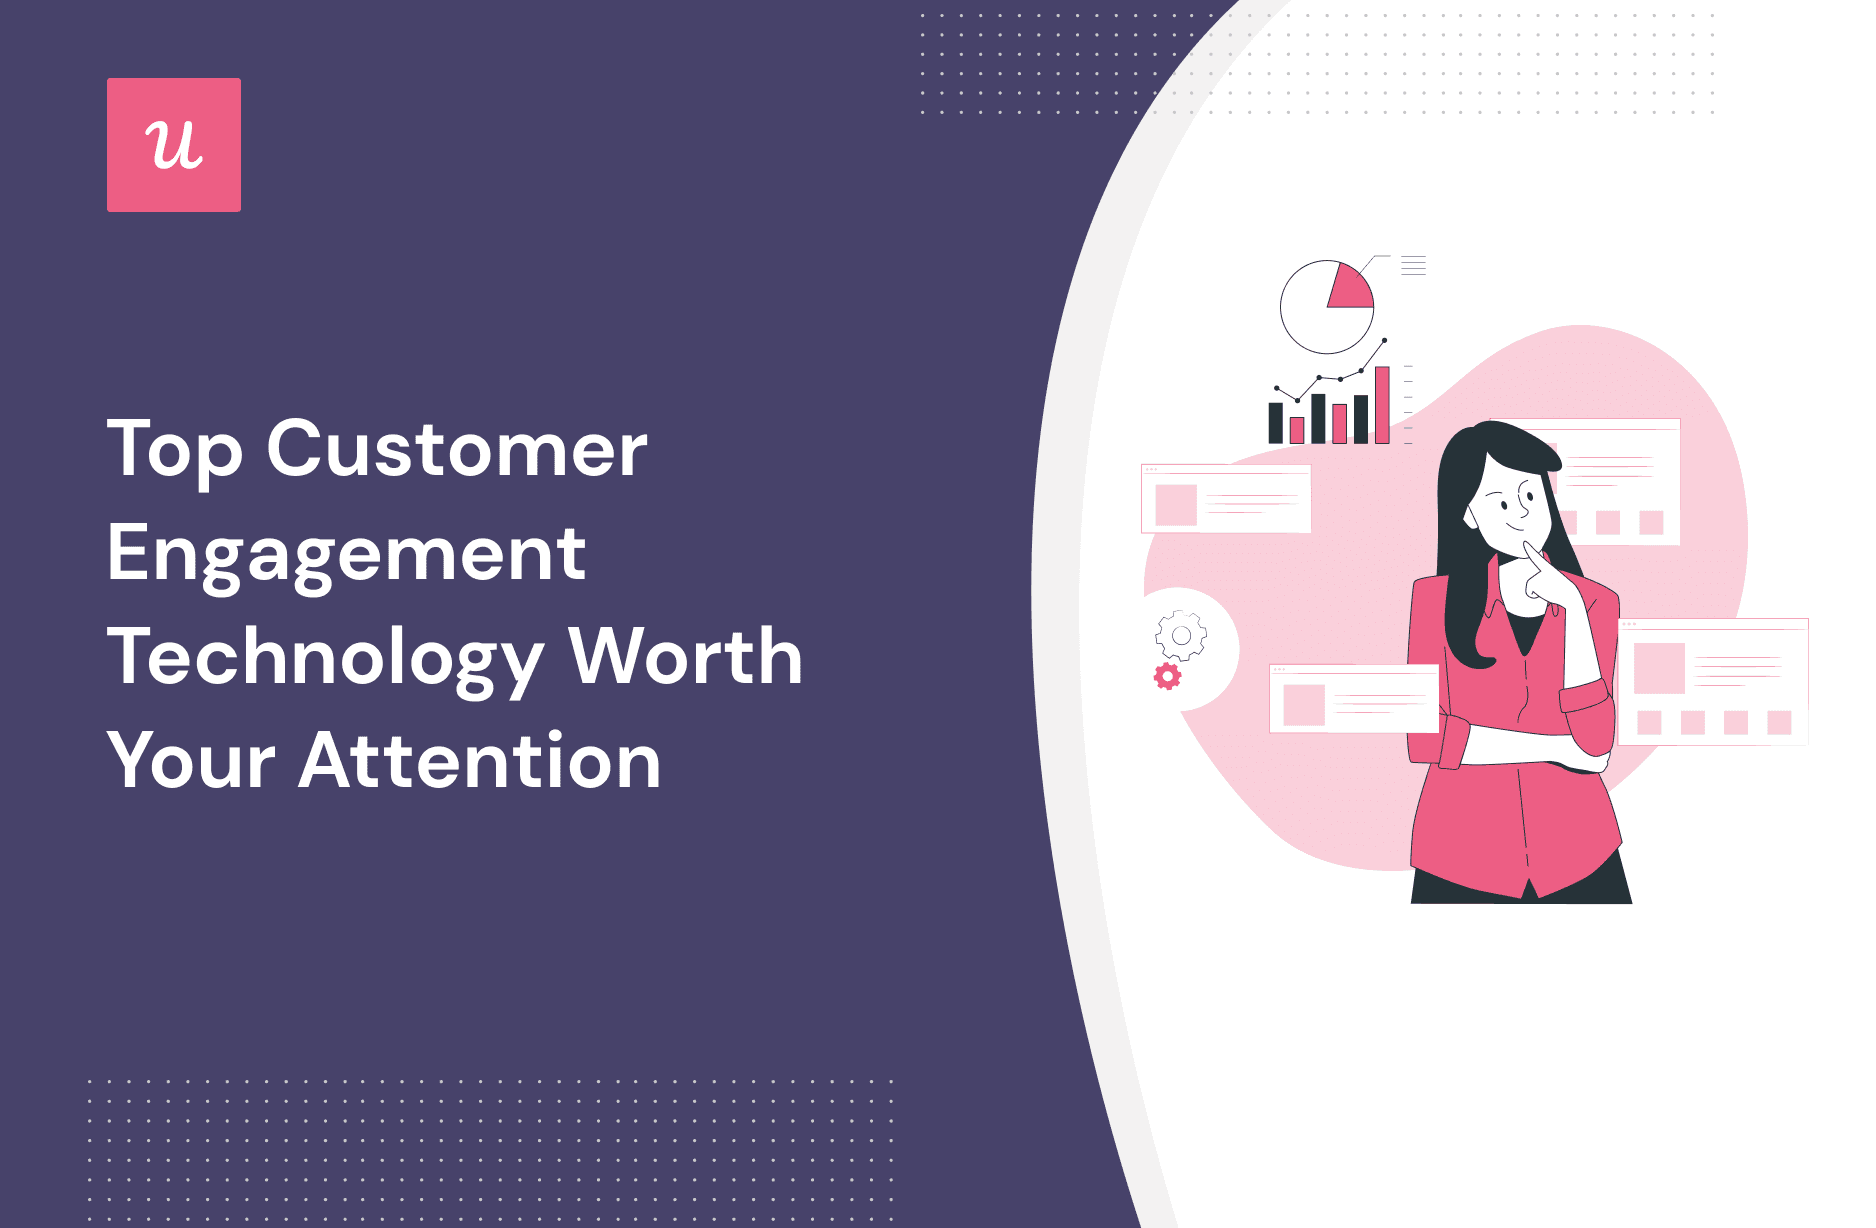 Top Customer Engagement Technology Worth Your Attention cover